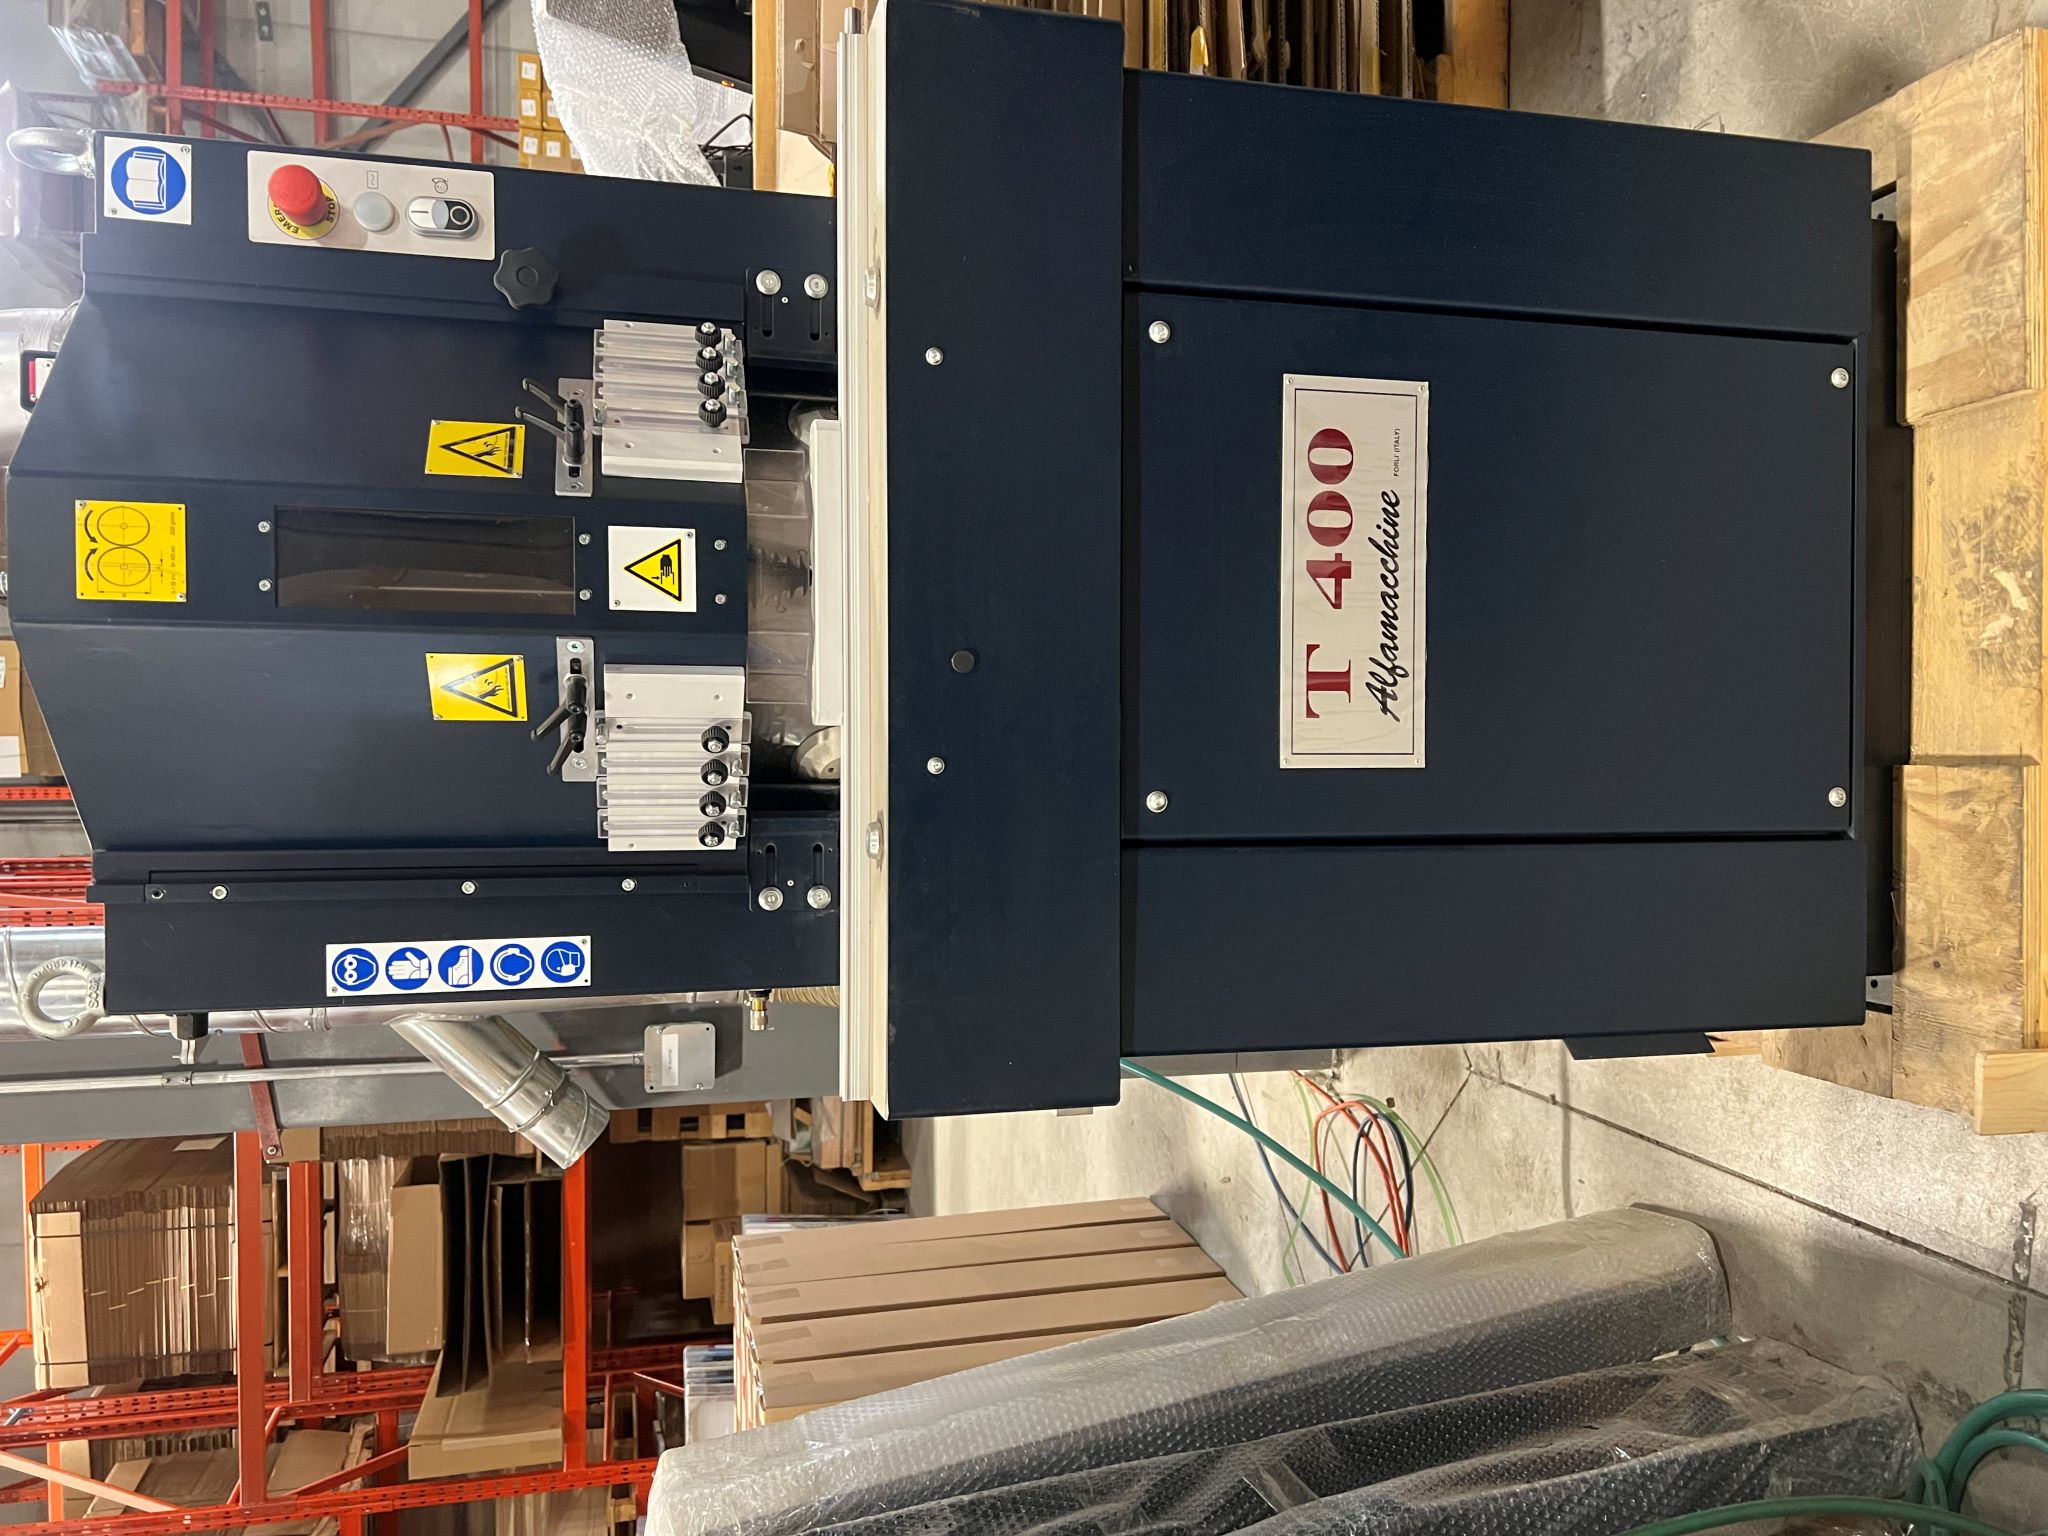 Equipment Lot: Fletcher AMP U-500 / U500 Single Channel Programmable Joiner, Fletcher AMP T-400 / T400 Double Mitre Saw, Hammond Power Solutions HPS SG3A0015PB 15KVA Sentinel Series Transformer, & ITW AMP VN4MP Programmable Frame Joiner